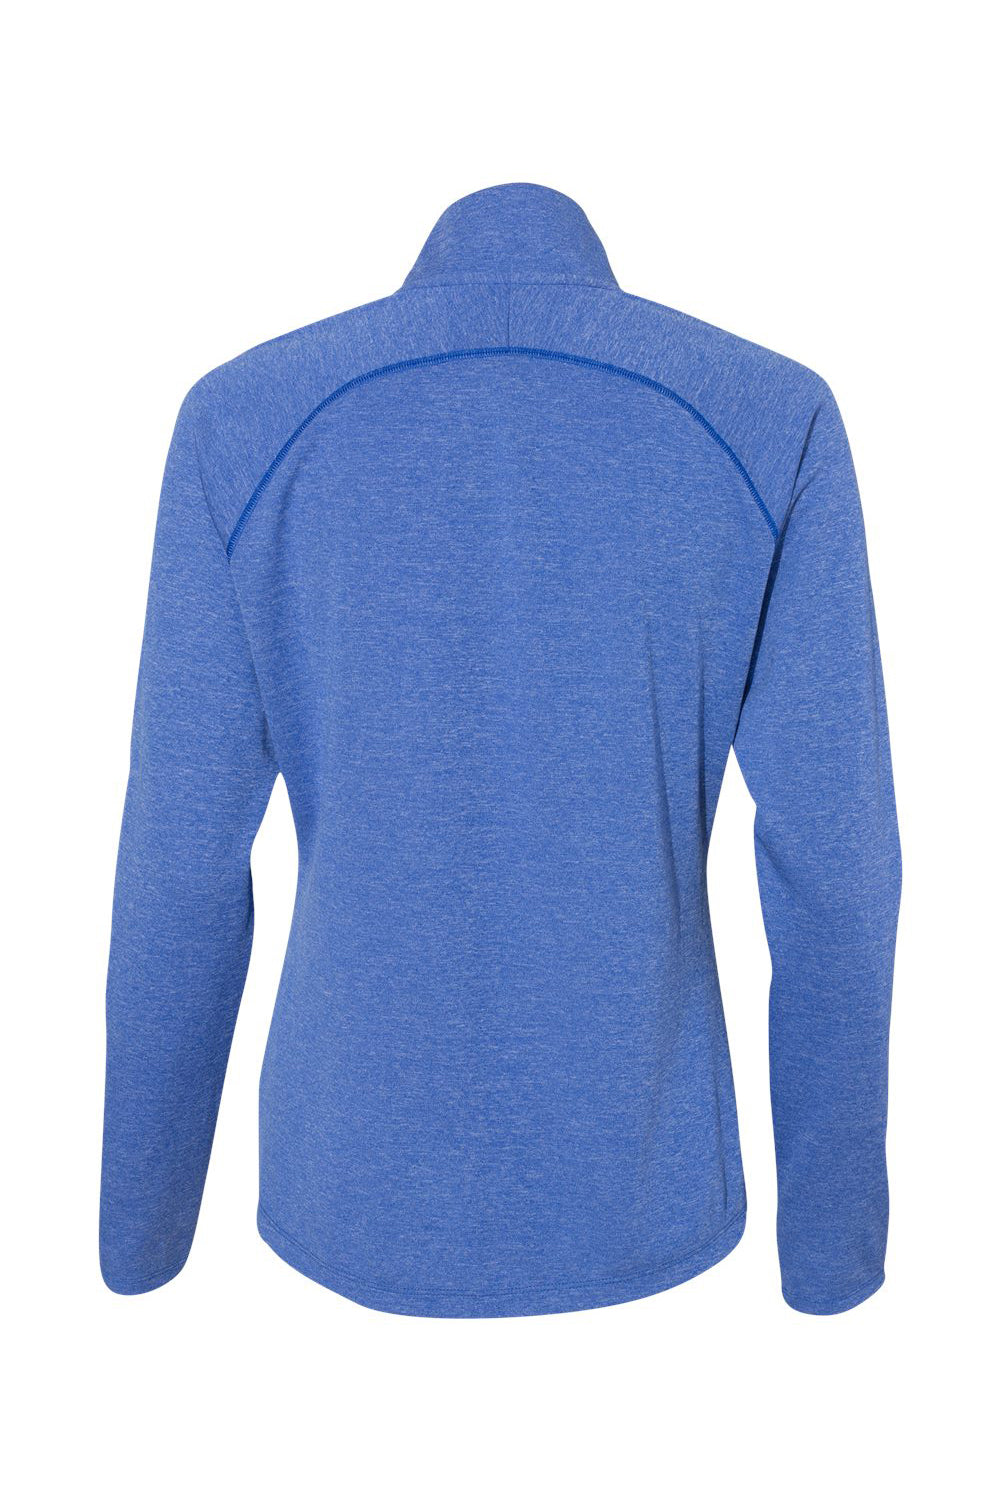 Adidas A281 Womens 1/4 Zip Pullover Heather Collegiate Royal Blue/Carbon Grey Flat Back